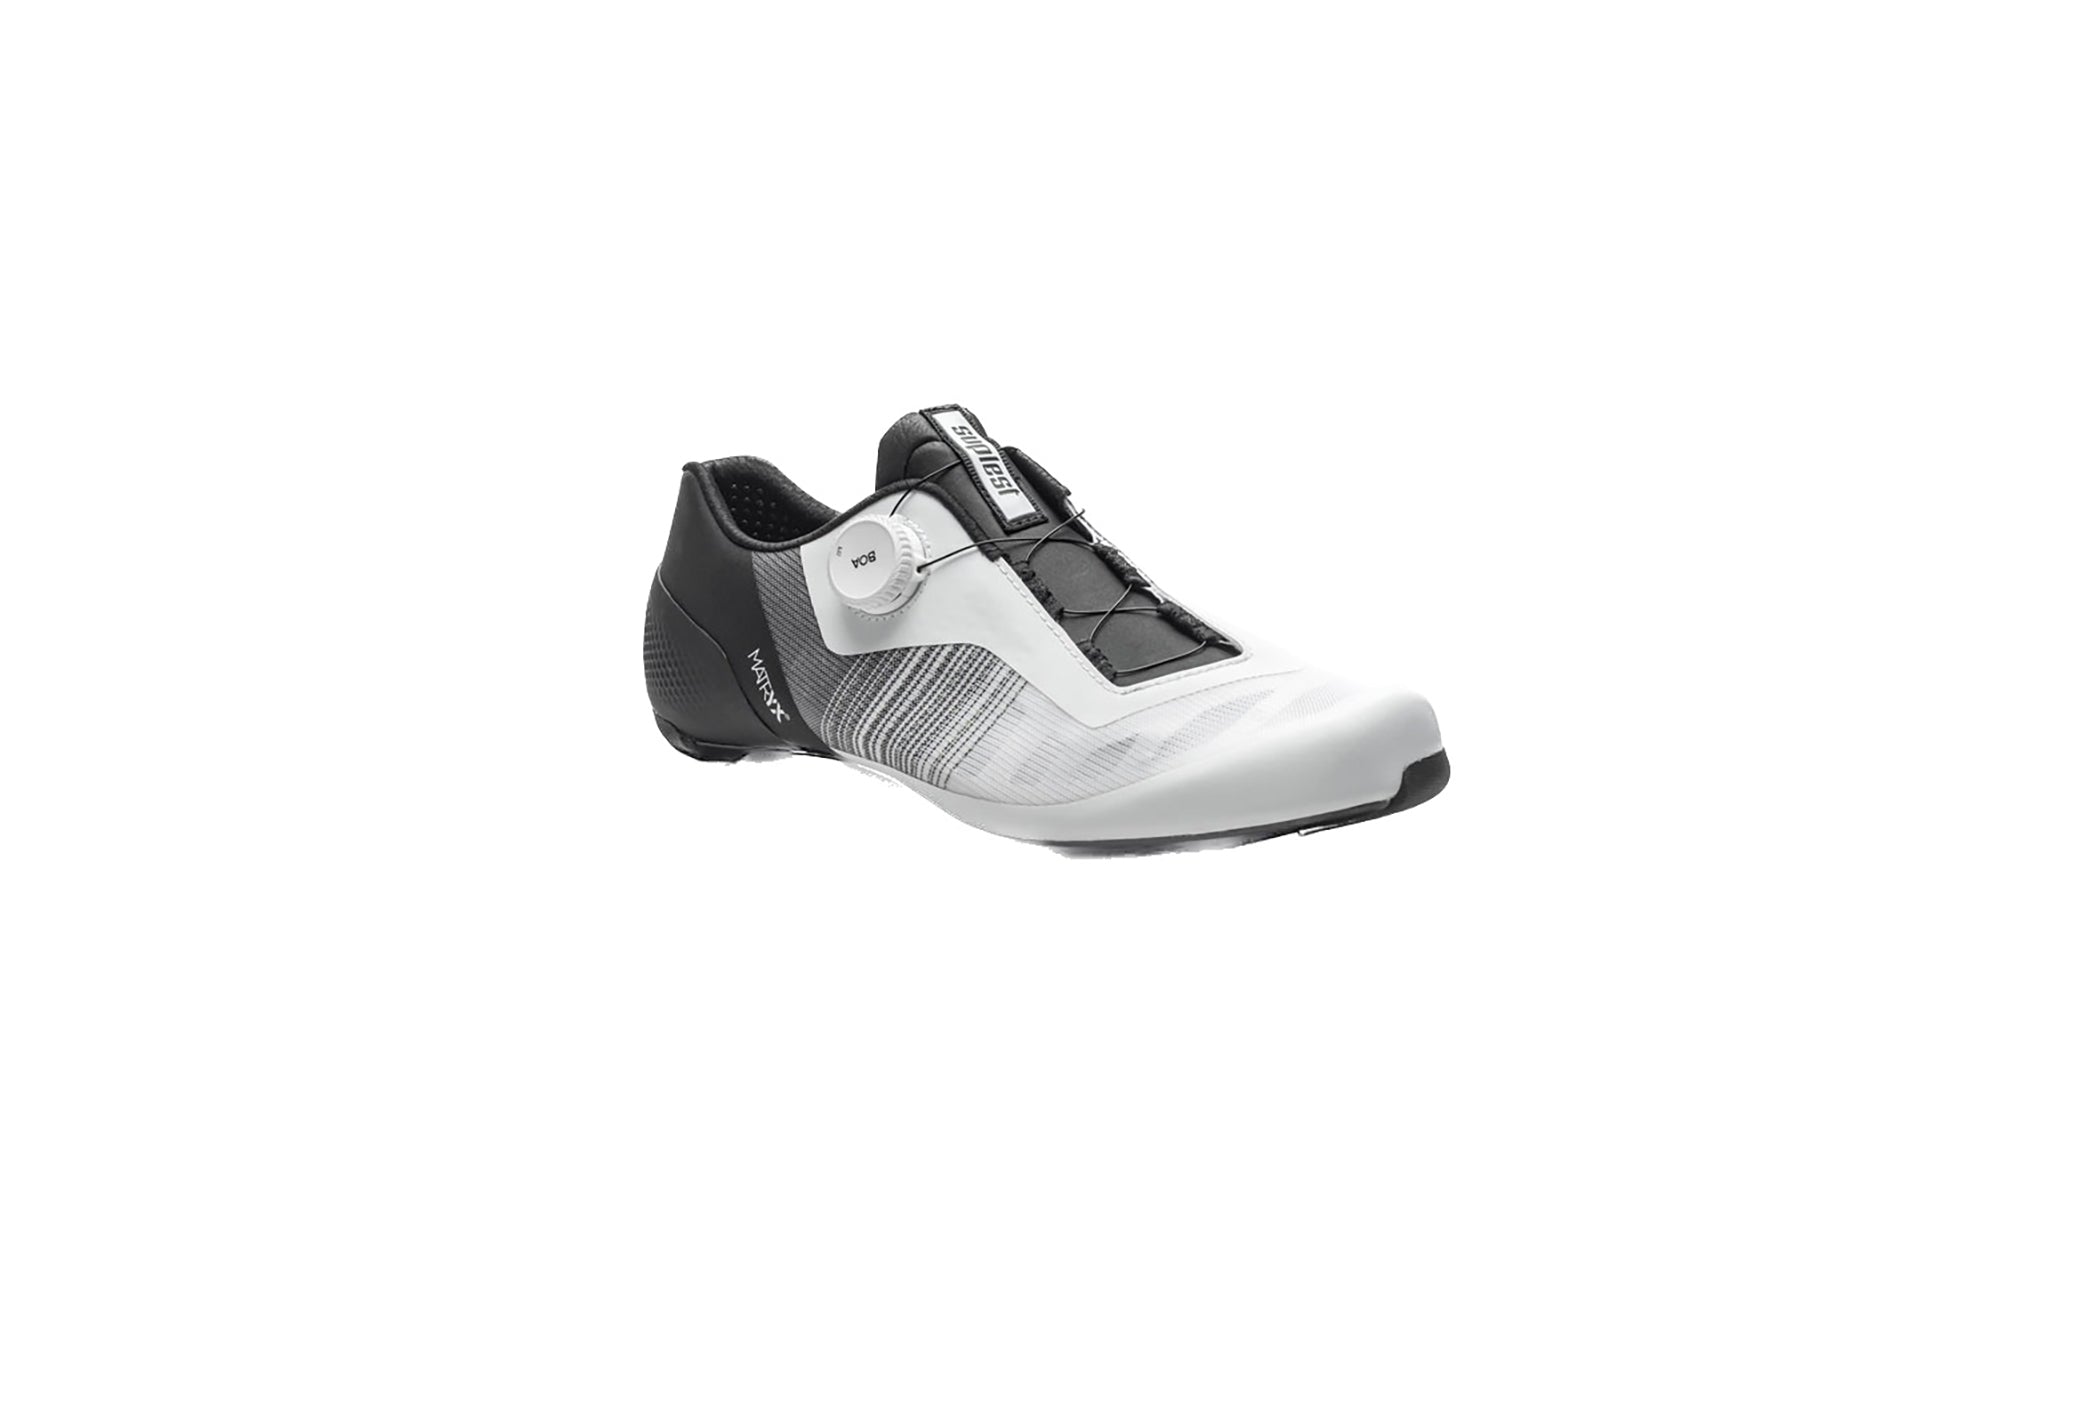 Cycling Shoes and Footwear For Sale The Pros Closet